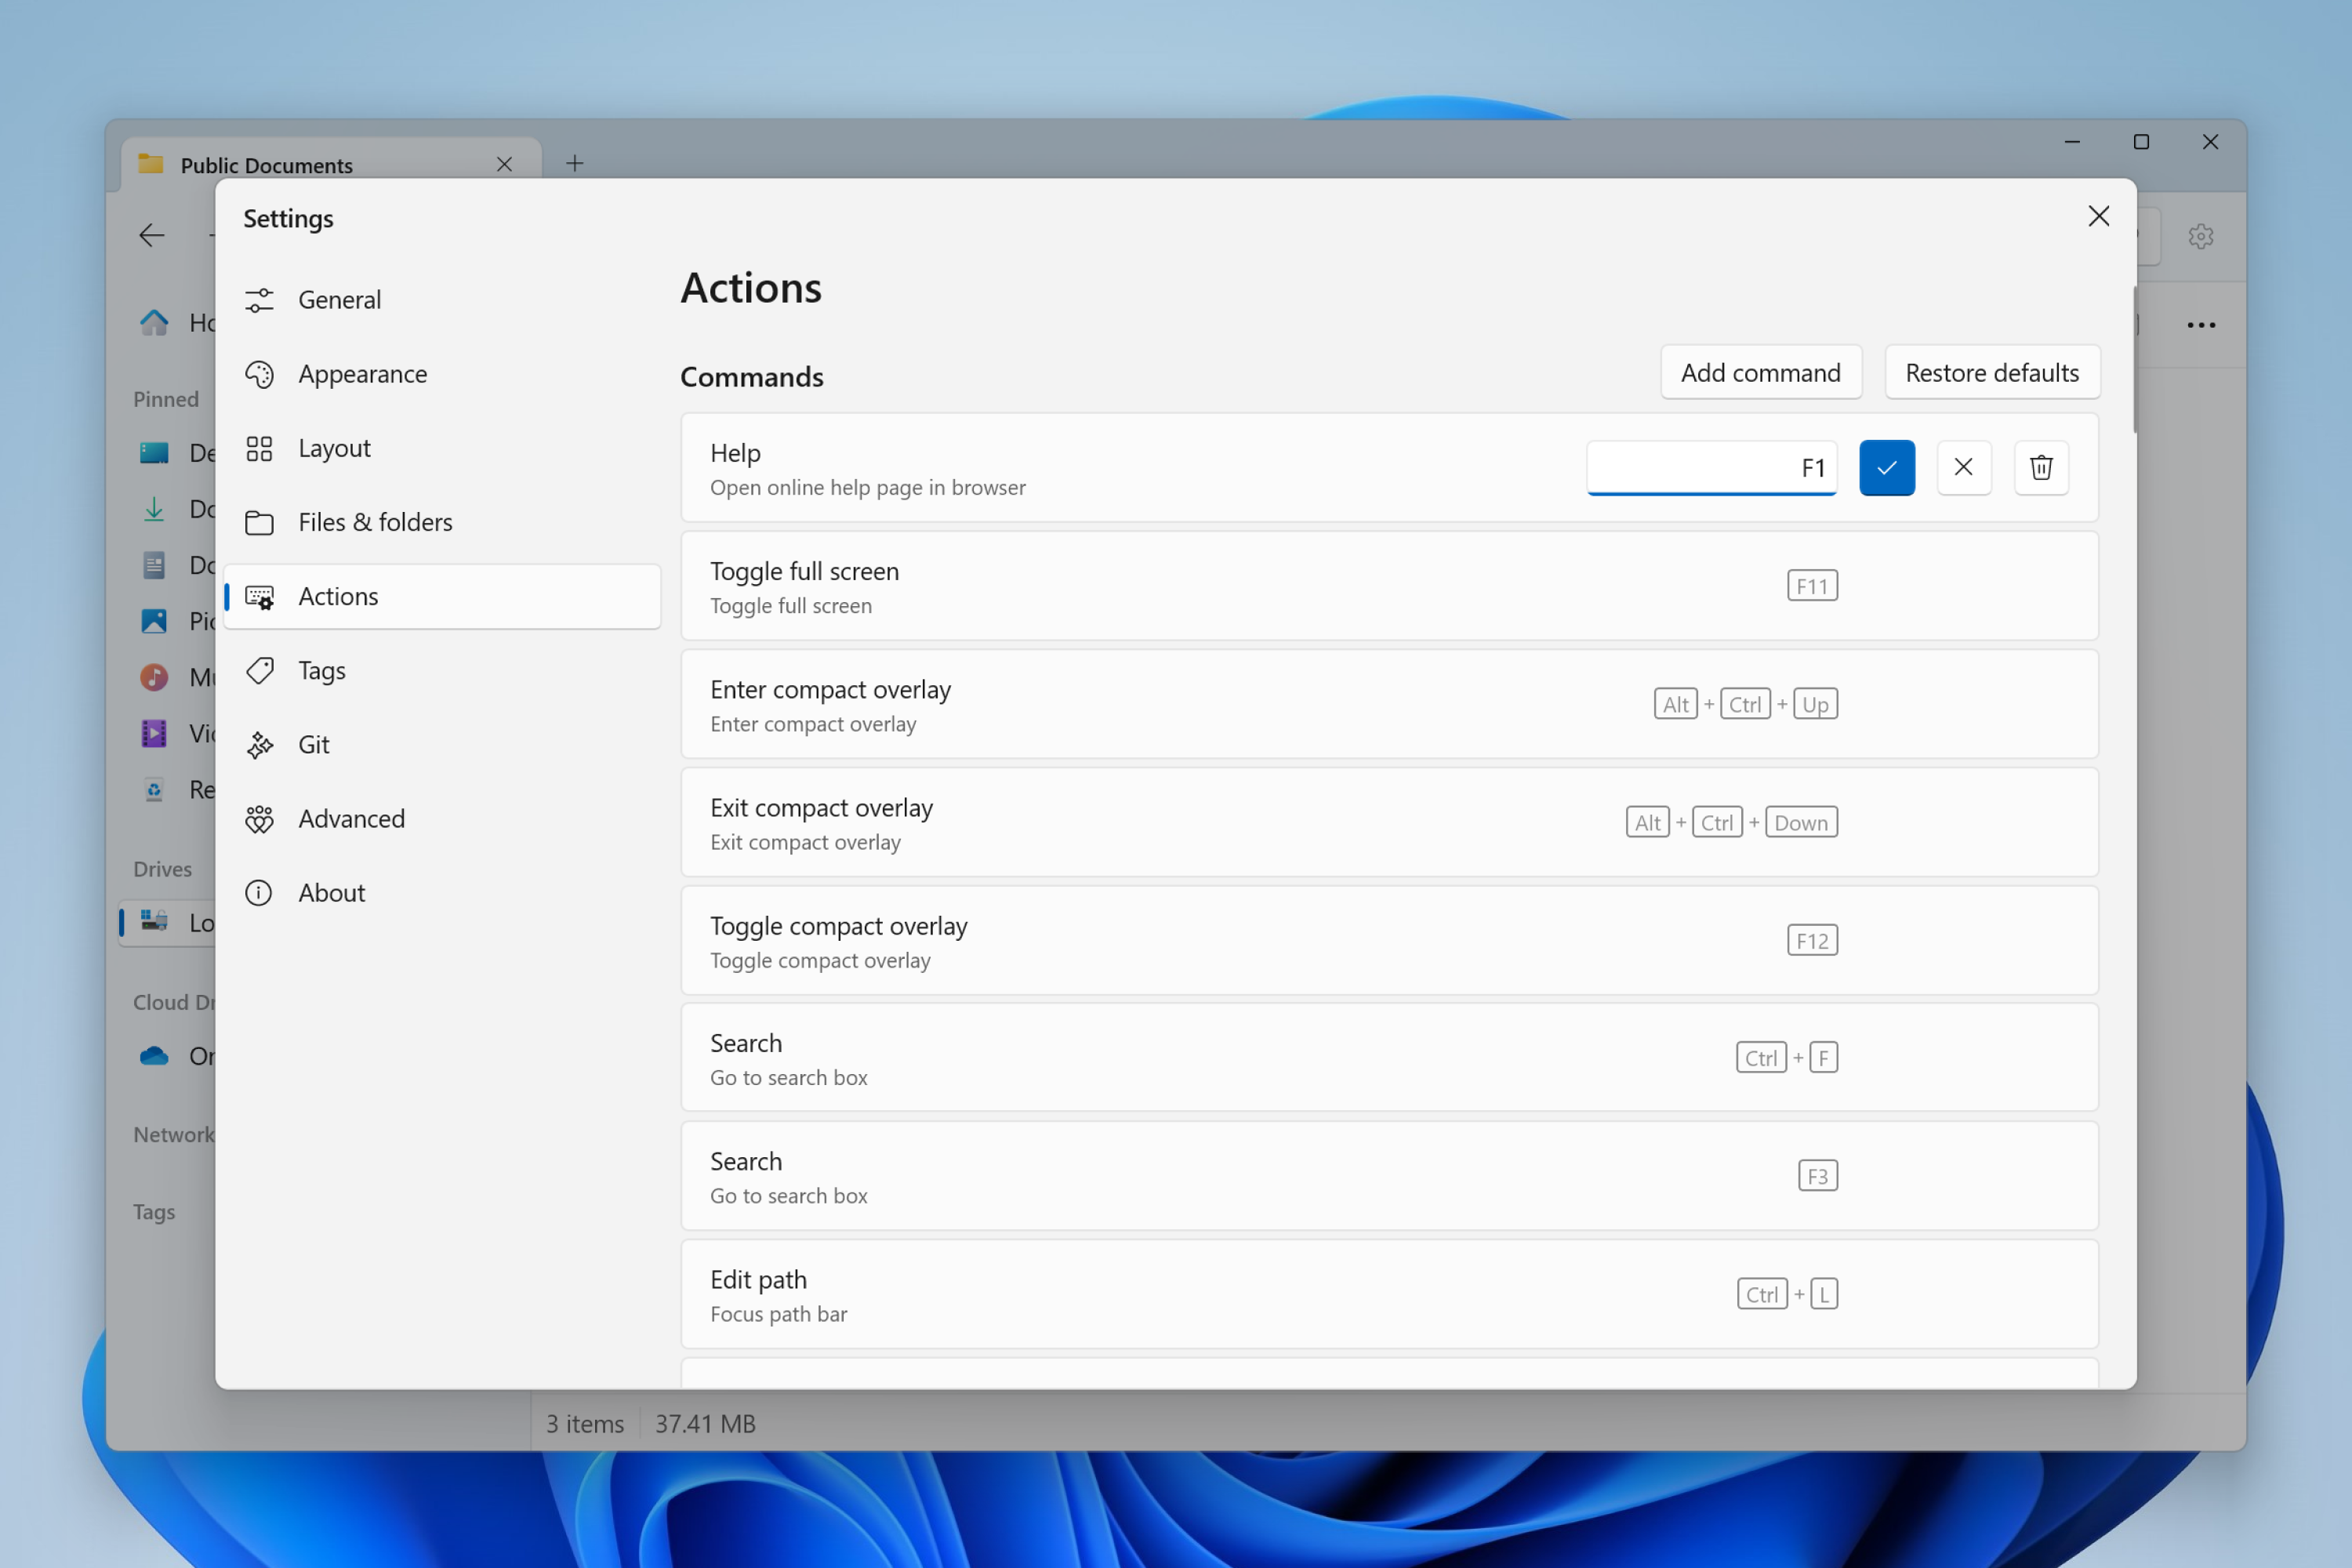 Actions settings page